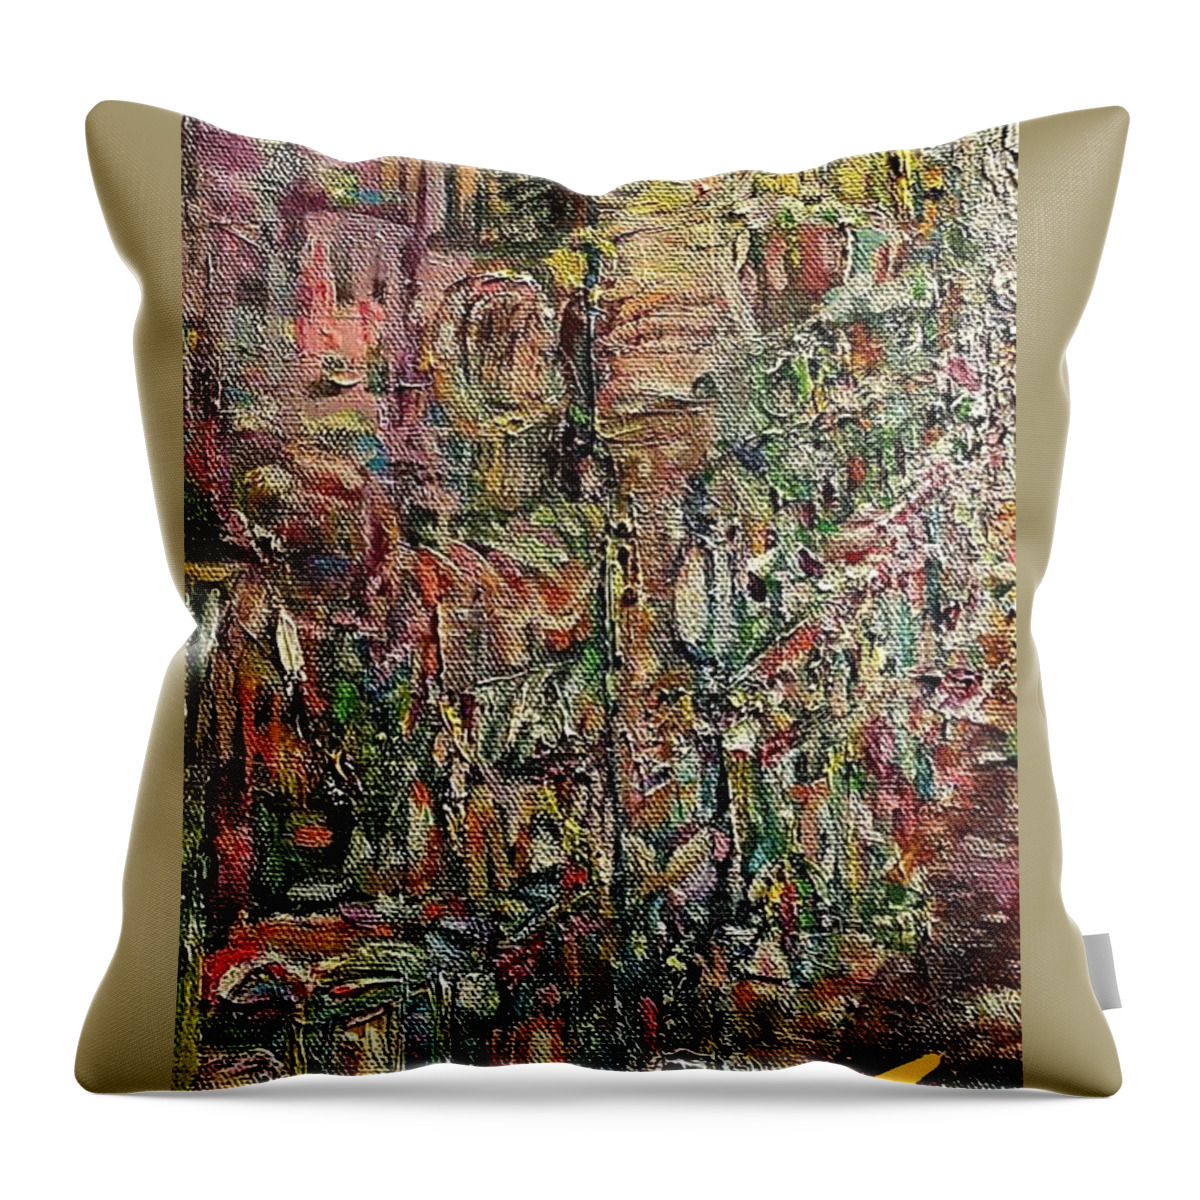 French Quarter Throw Pillow featuring the painting The Quarter by Julie TuckerDemps